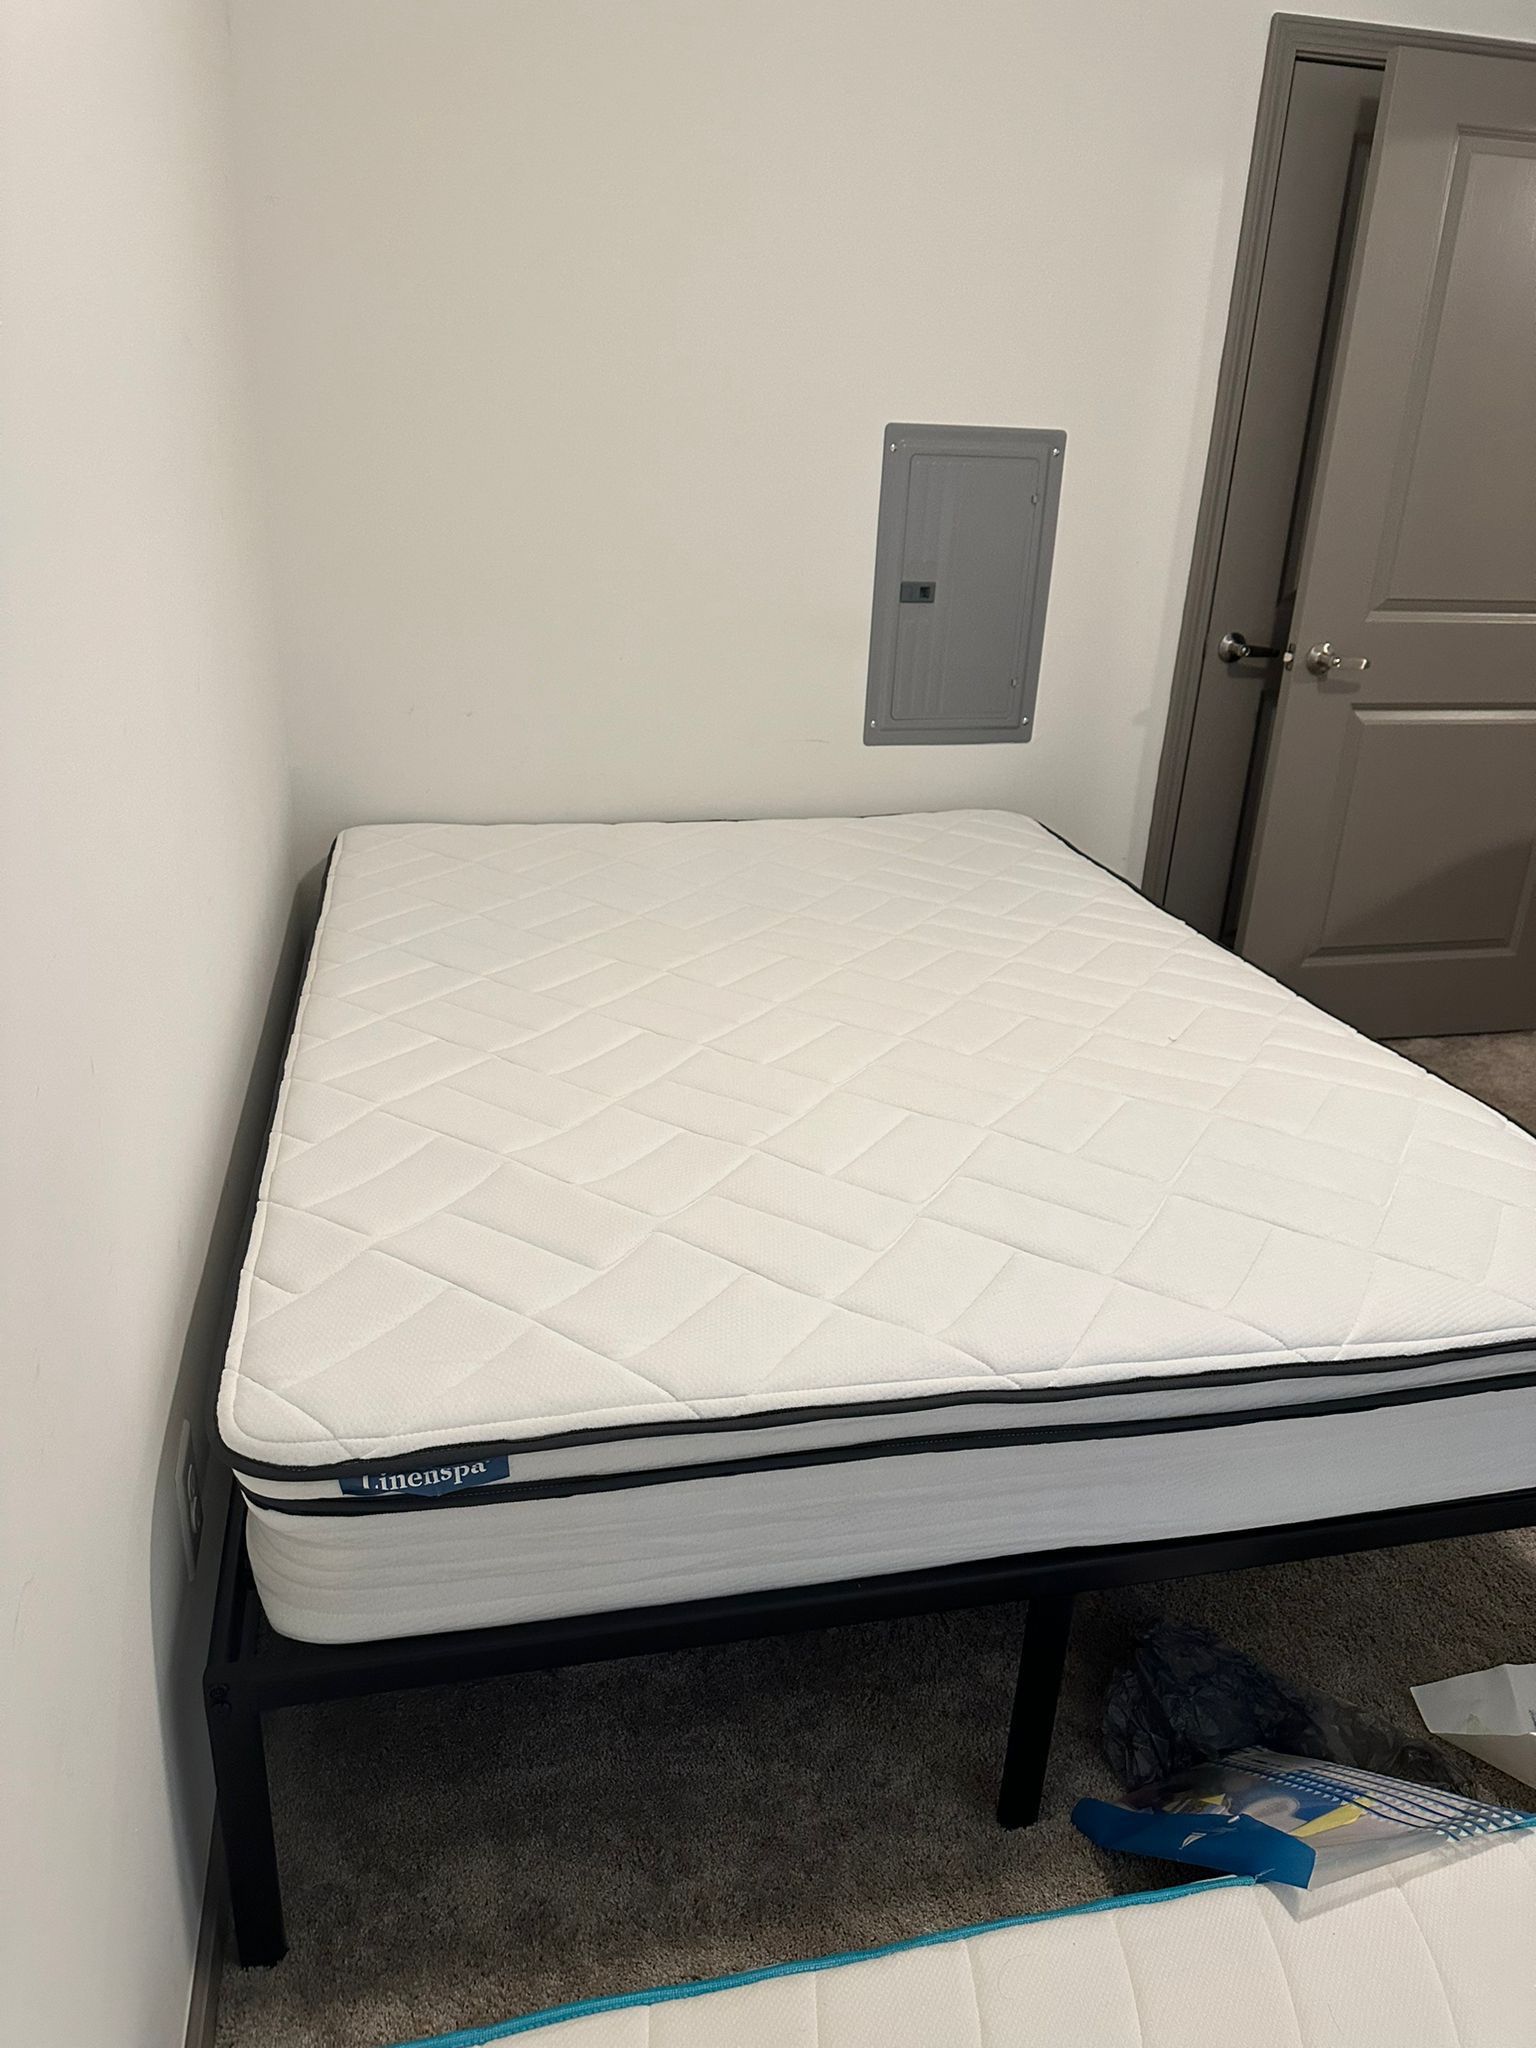 Queen Mattresses and Bed Frame